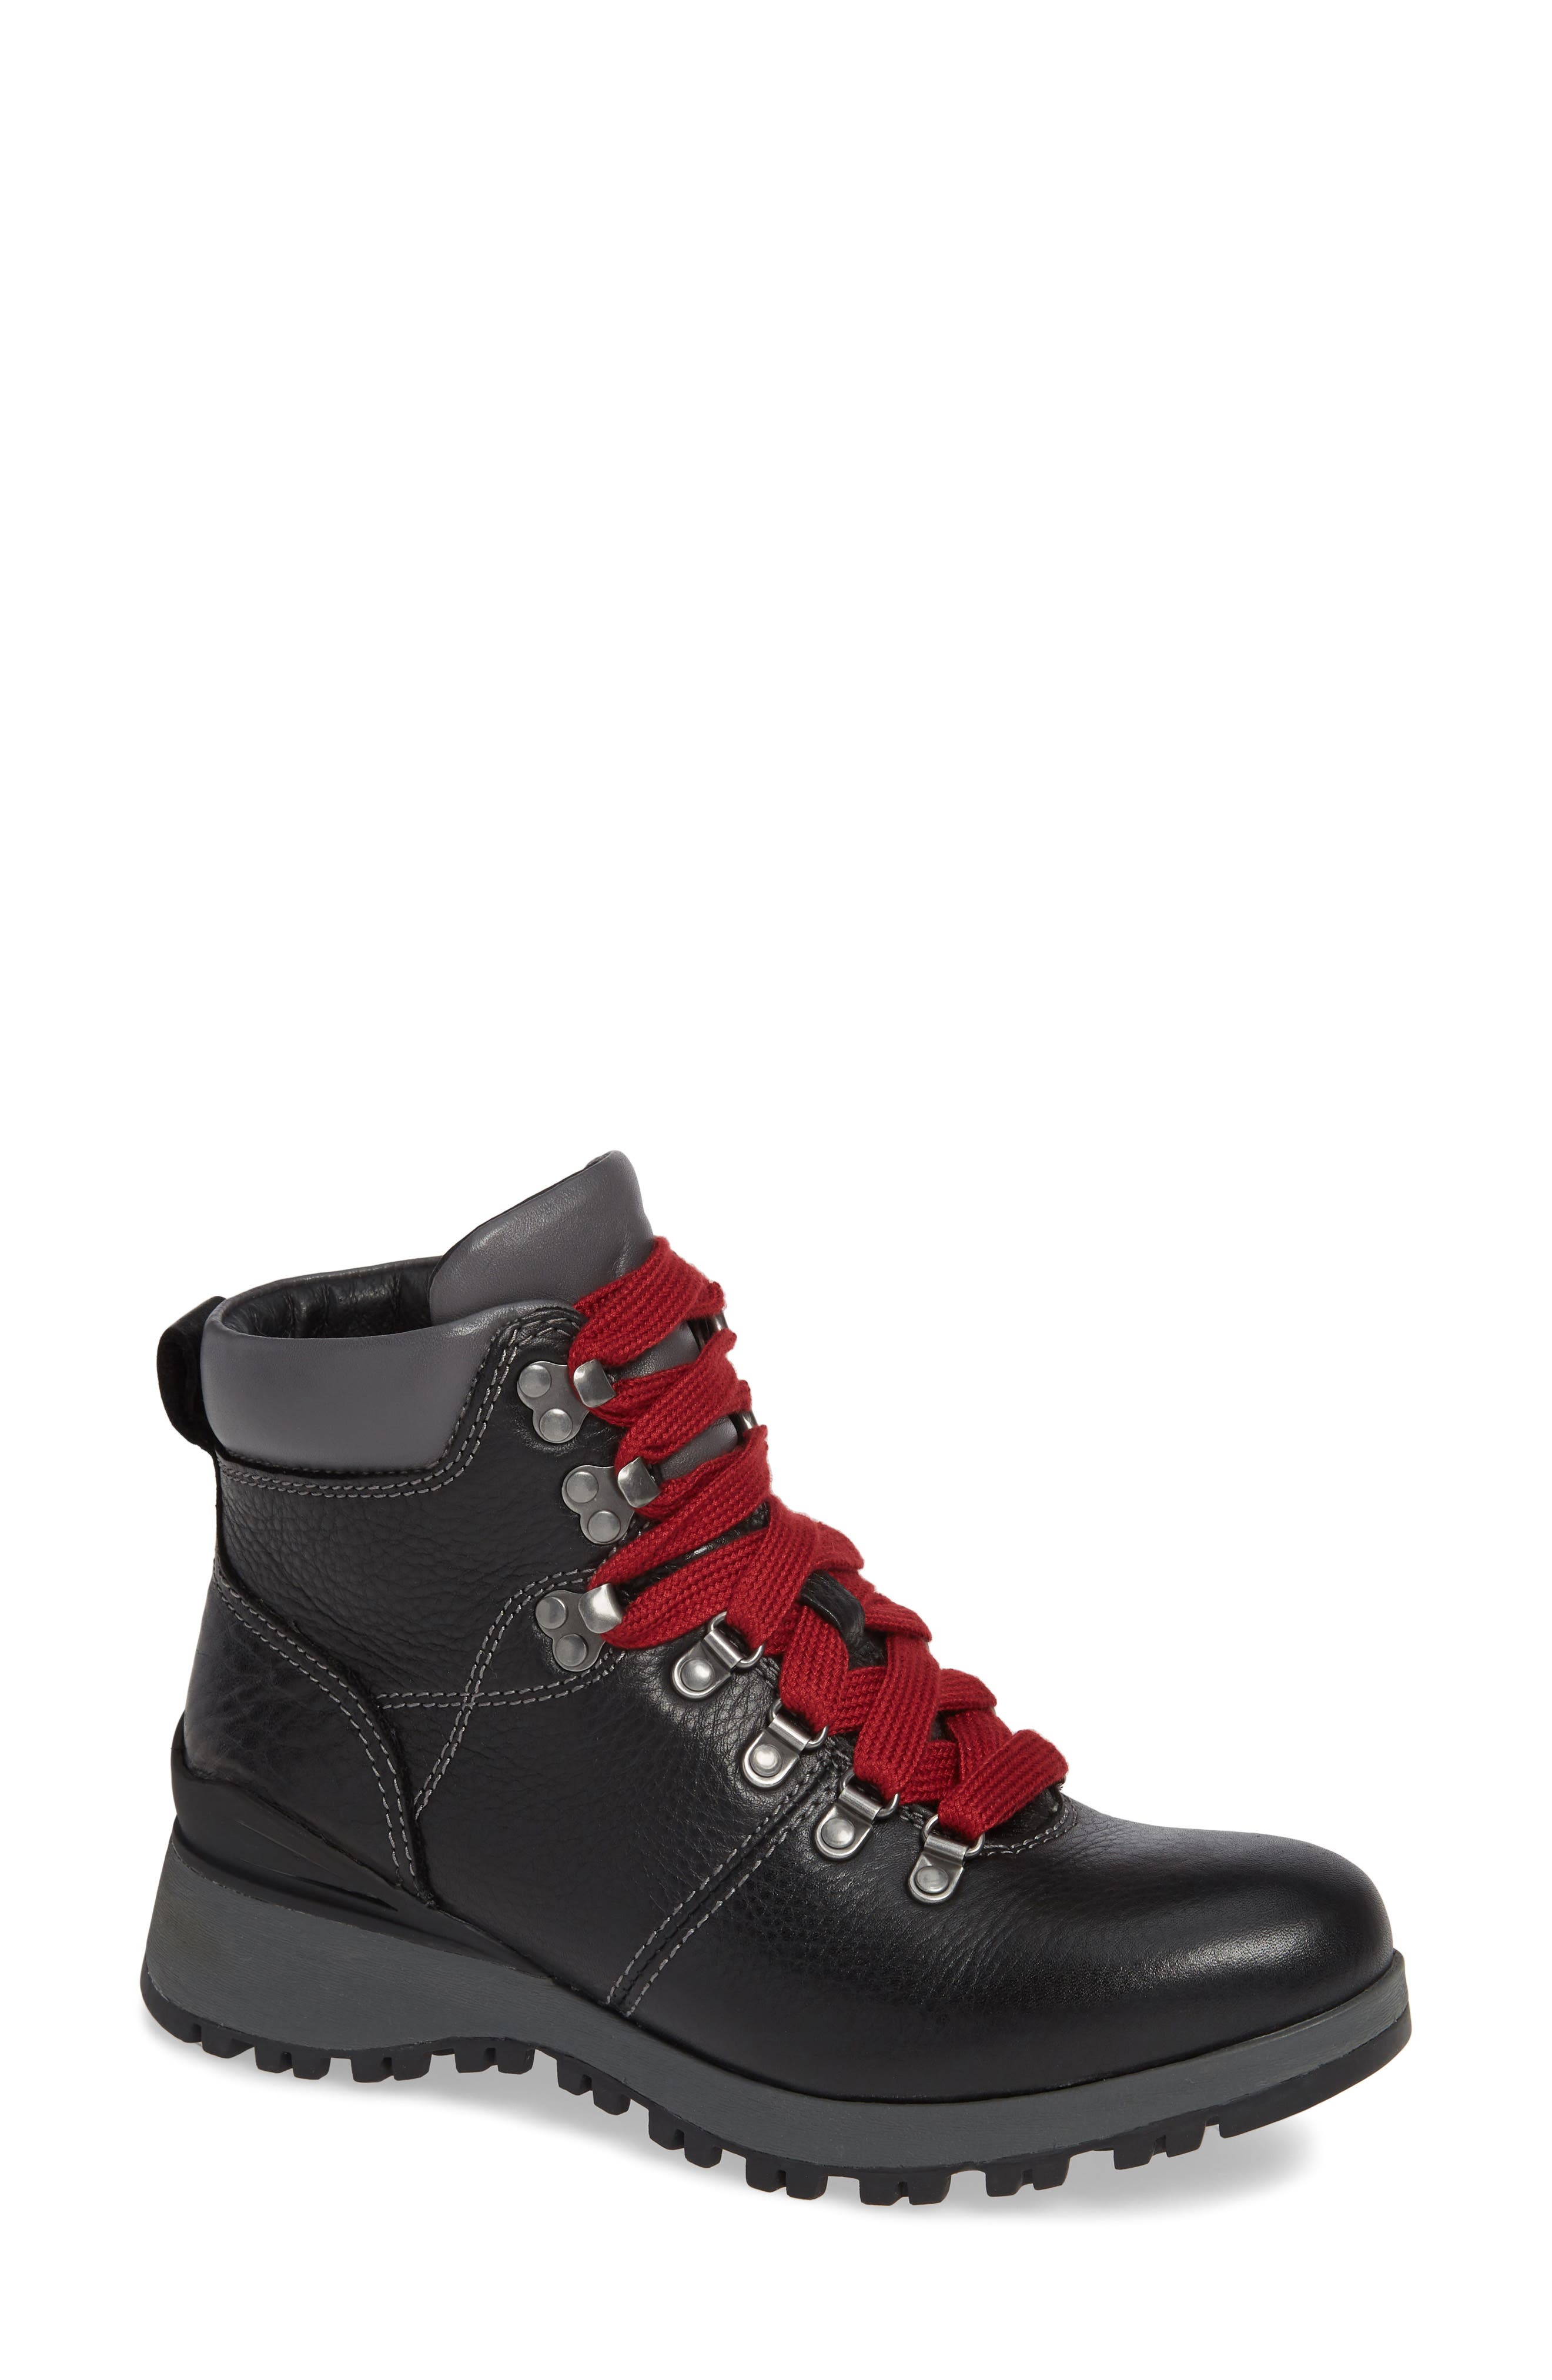 black hiking boots with red laces